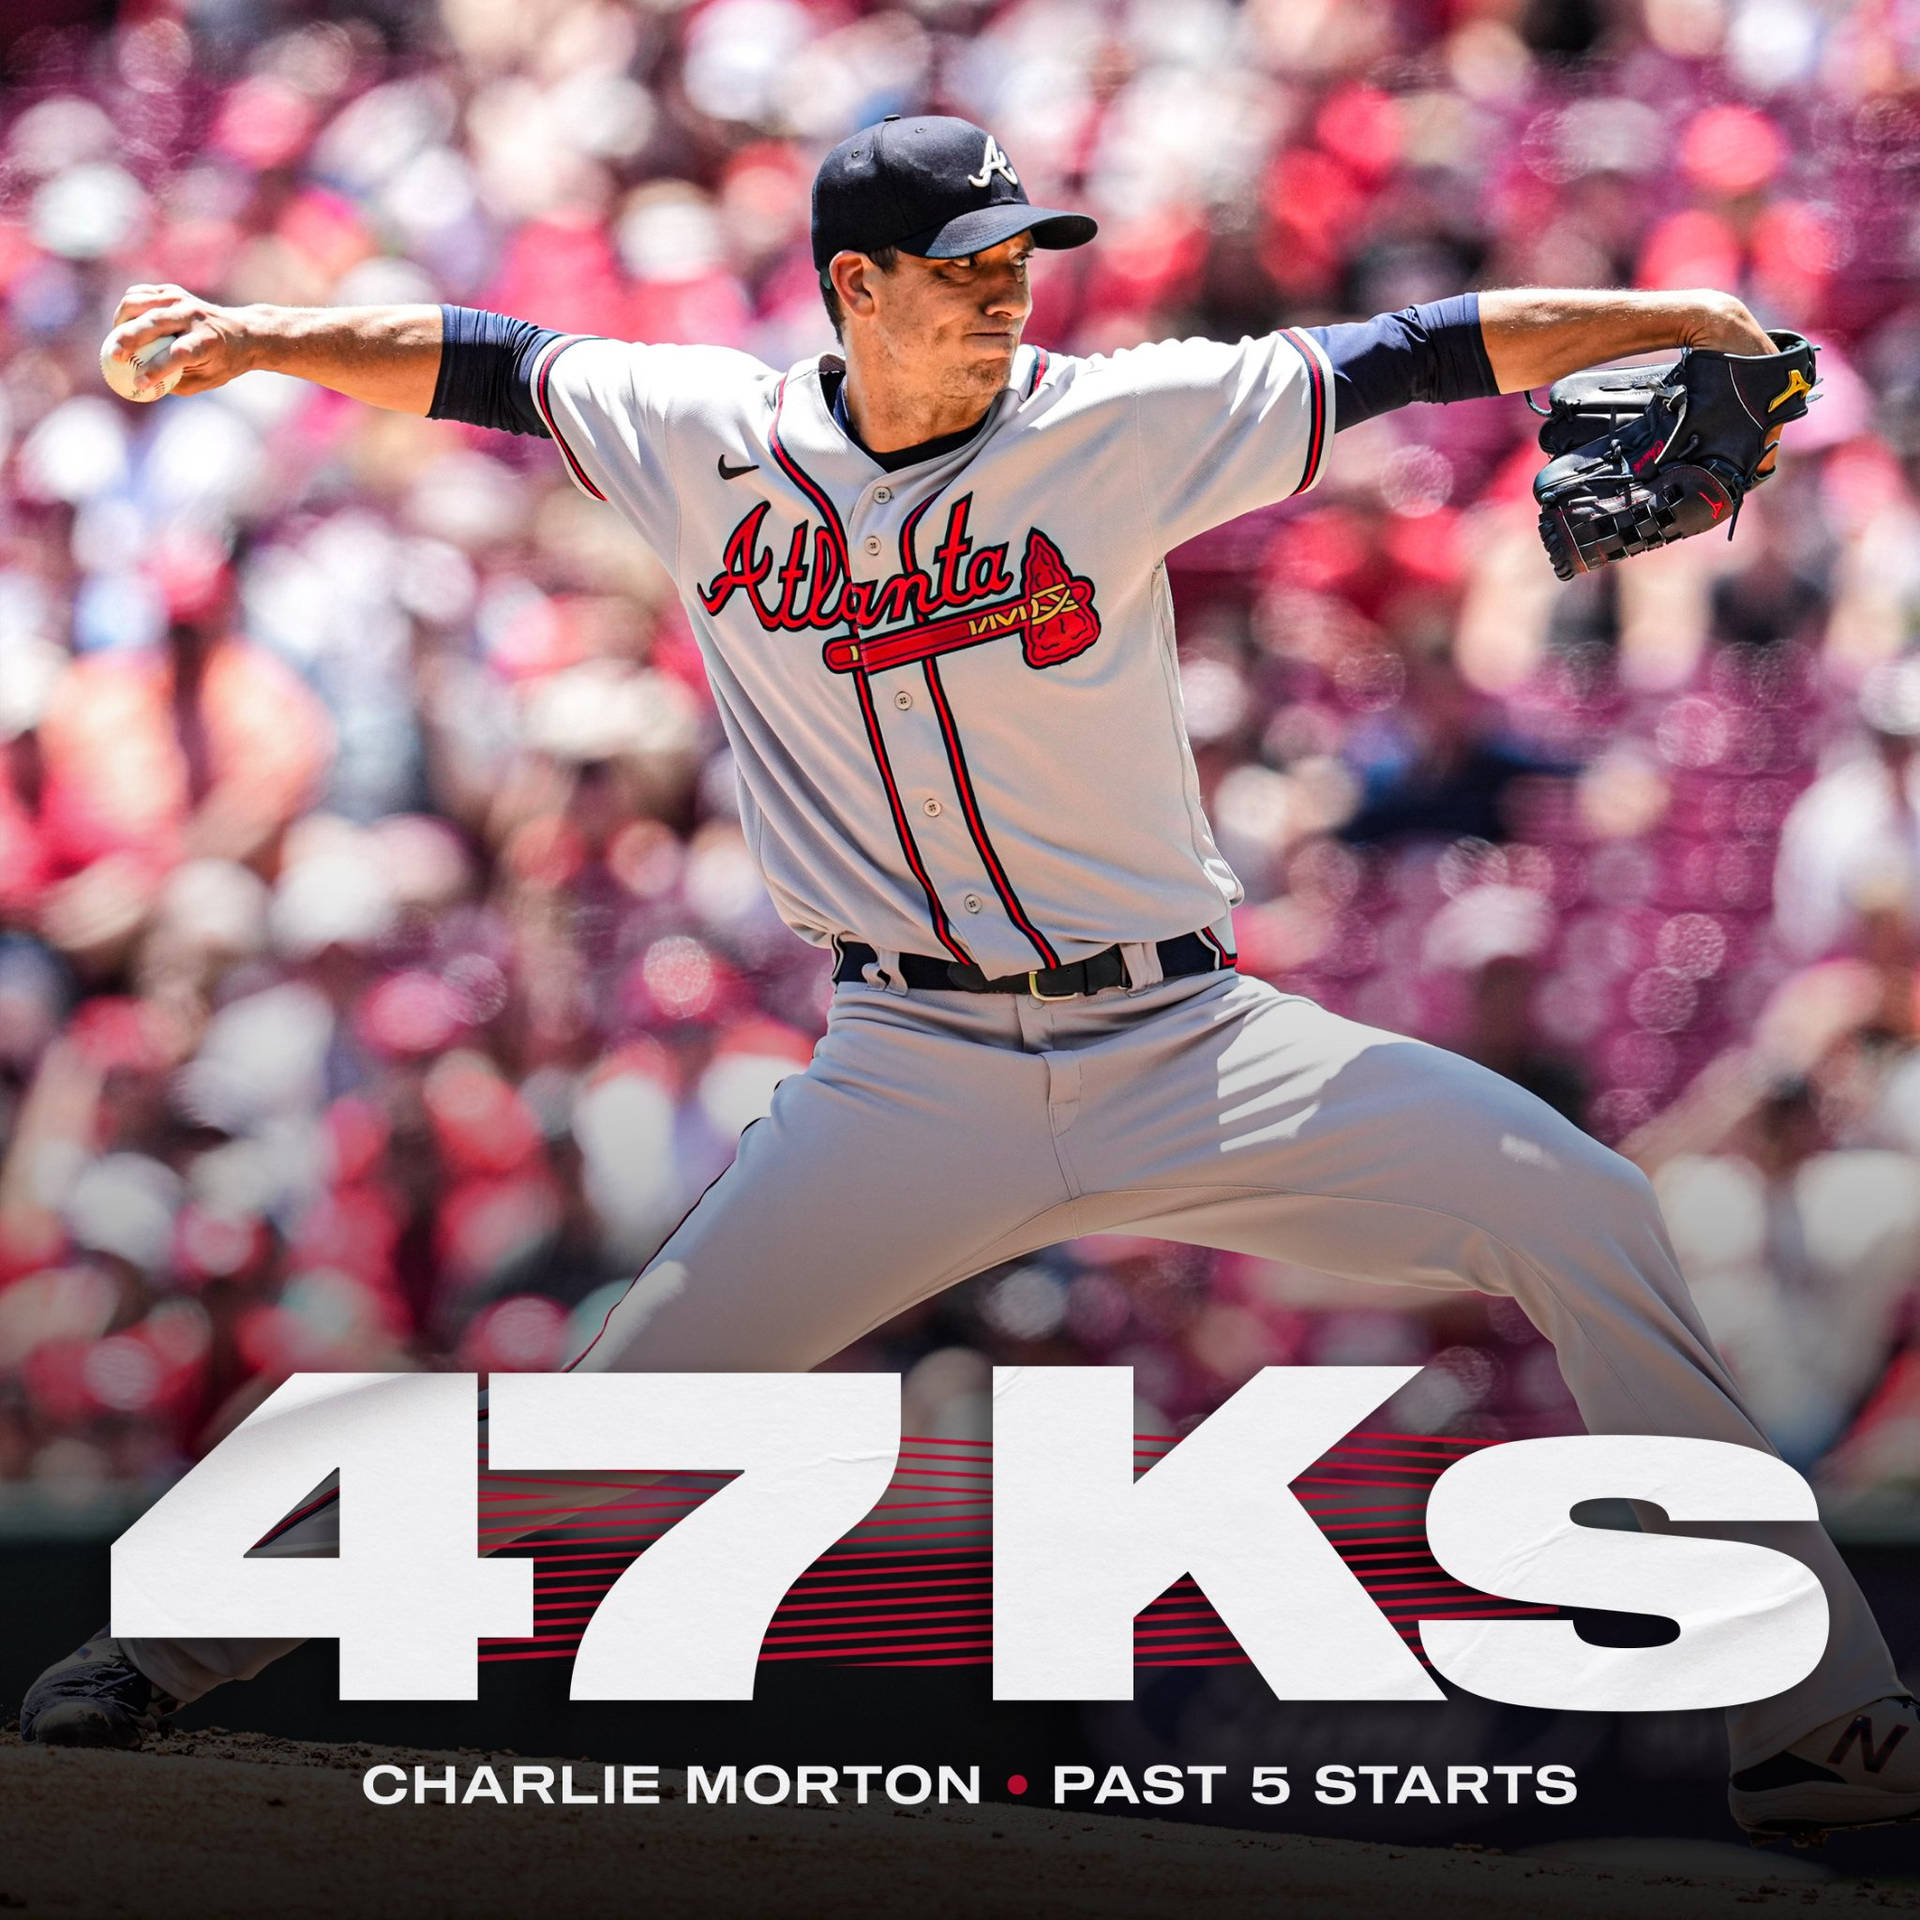 Download Charlie Morton in action during a game, showcasing his